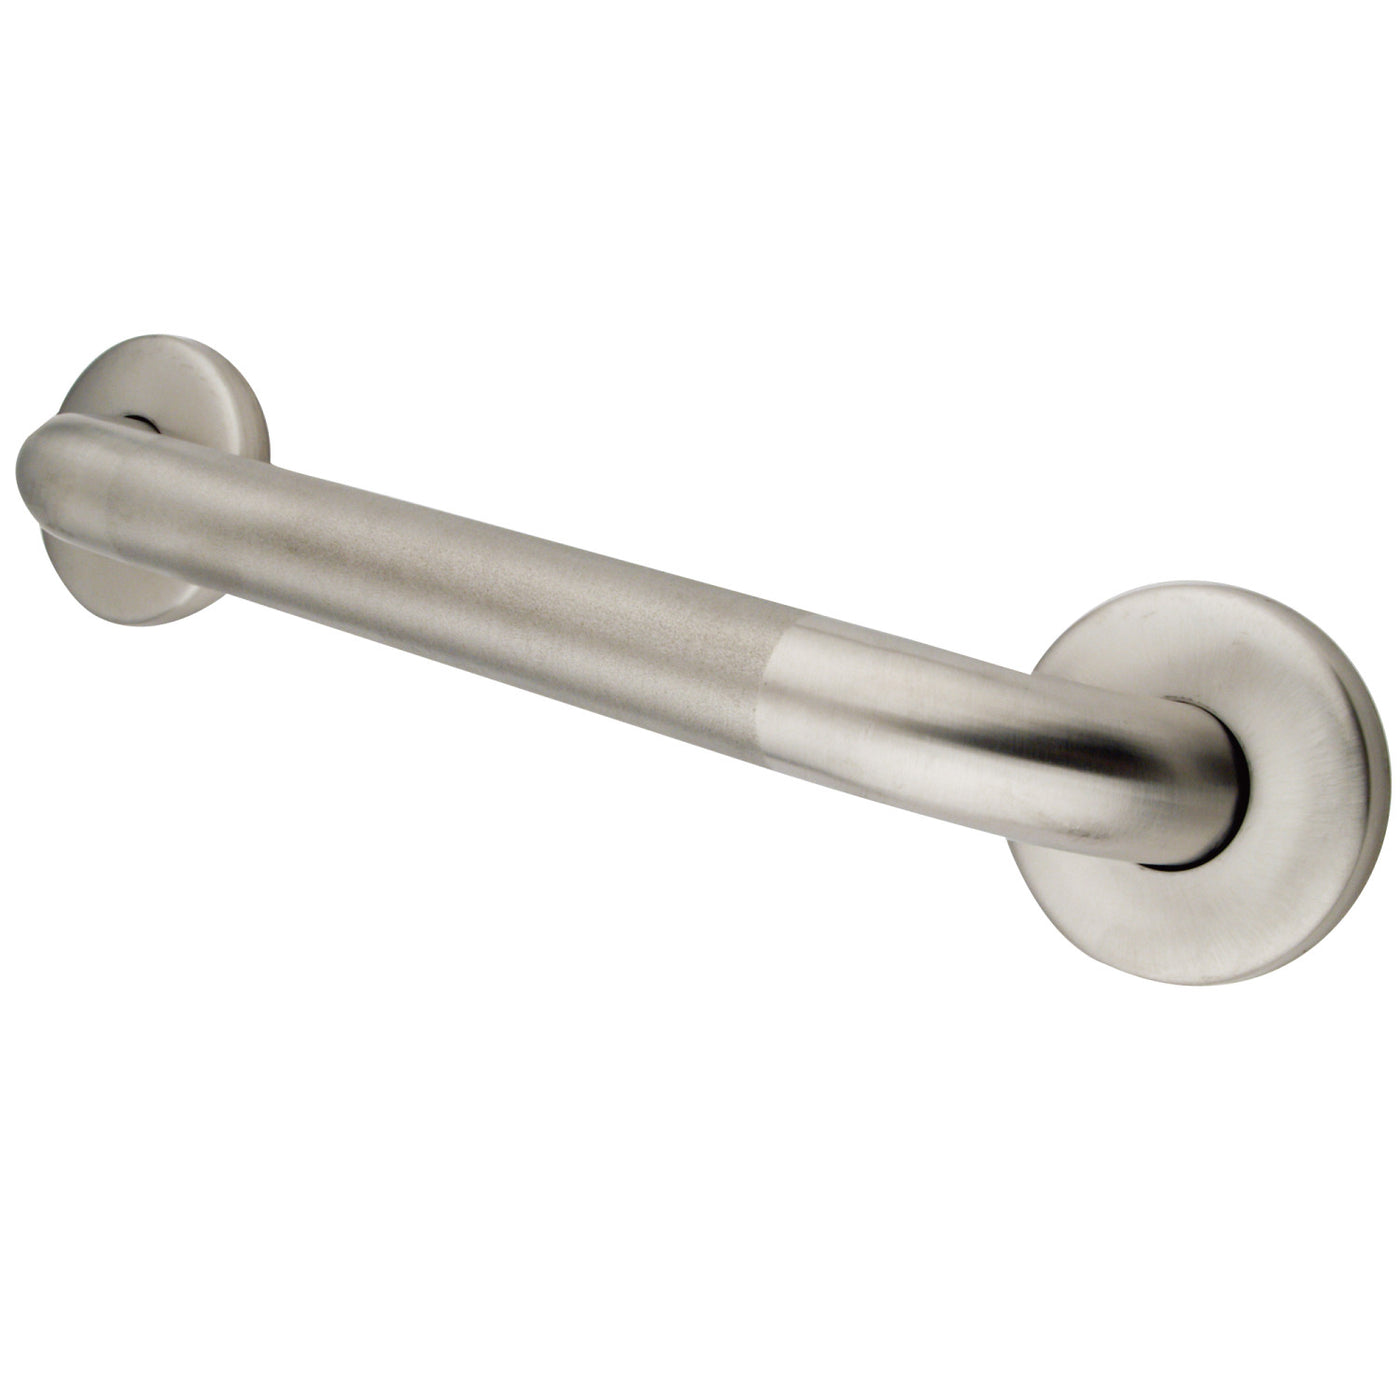 Elements of Design EGB1412CT 12-Inch Stainless Steel Grab Bar, Brushed